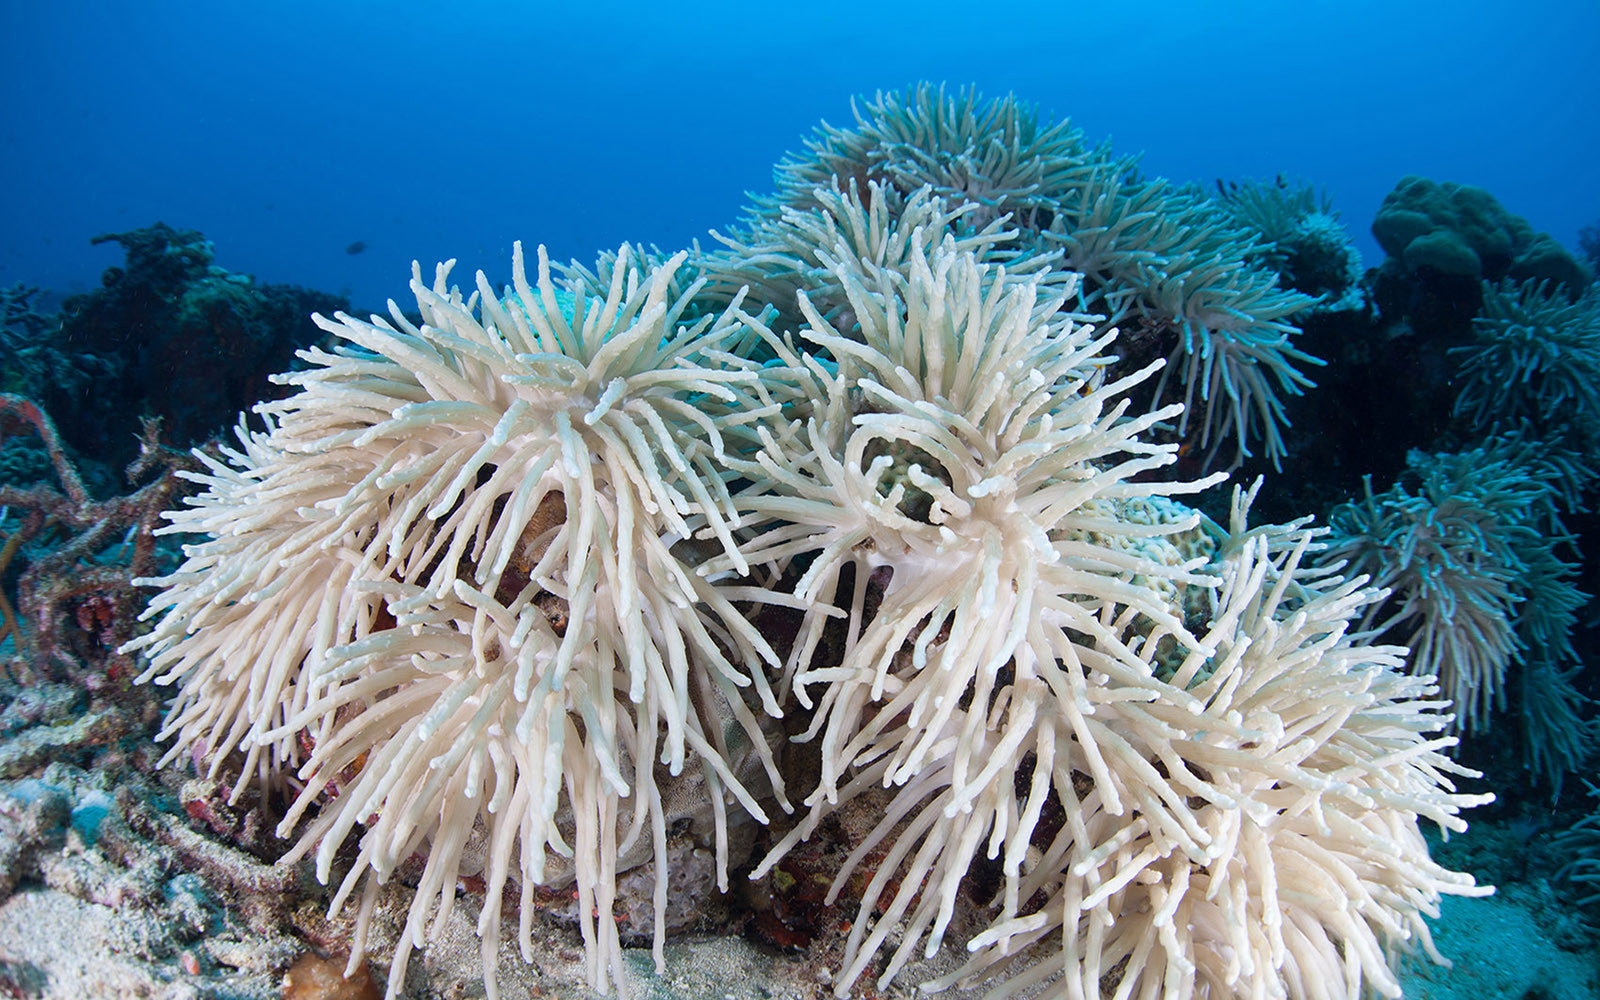 Facts We Should Know About Coral Bleaching